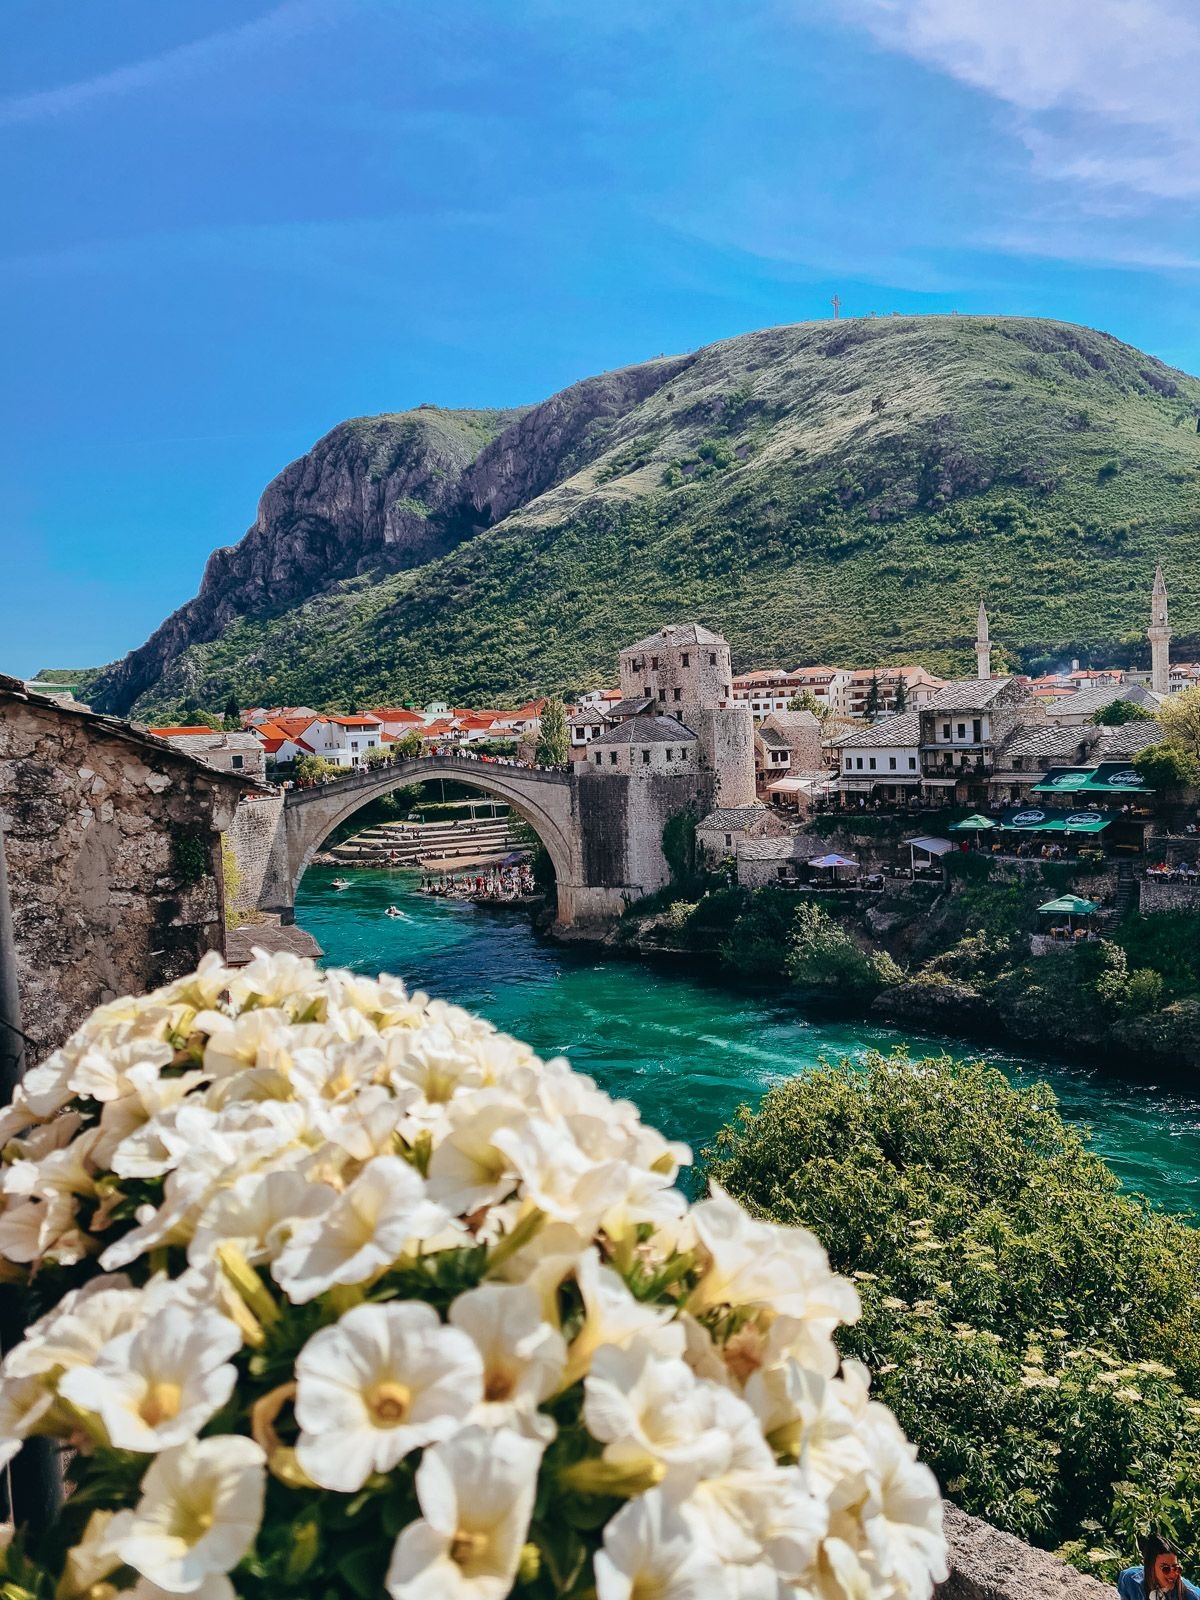 view of the old town bridge in Mostar with flowers in the foreground and a green mountain in the background